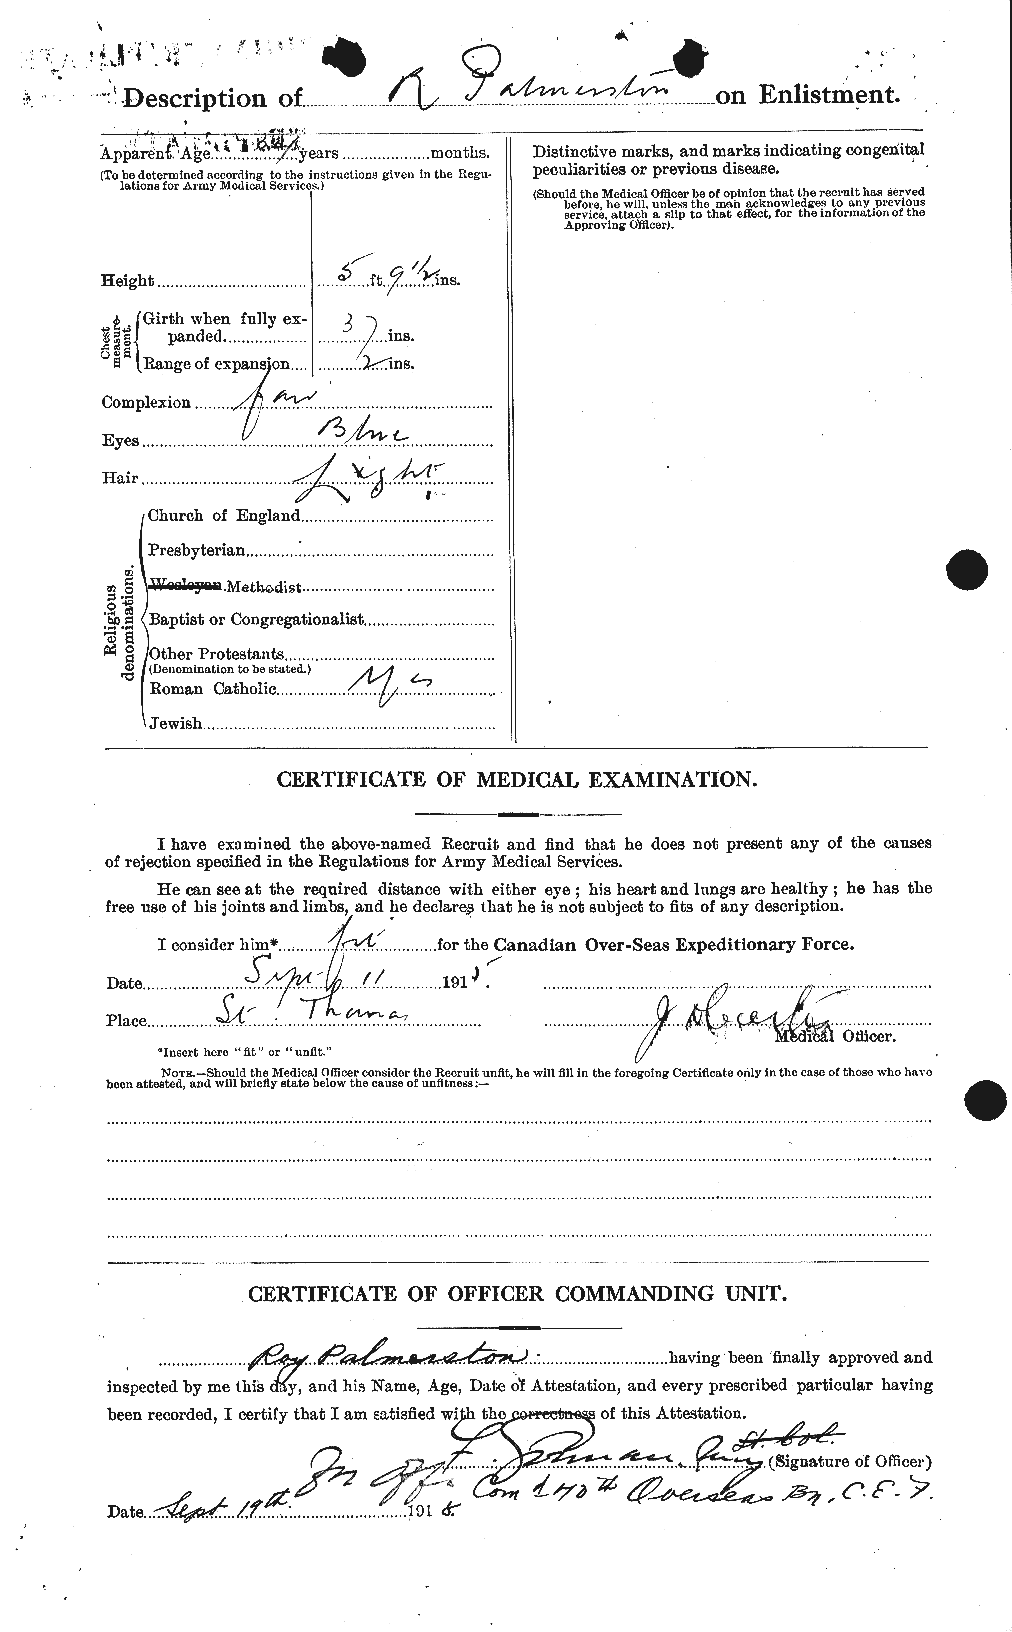 Personnel Records of the First World War - CEF 563256b